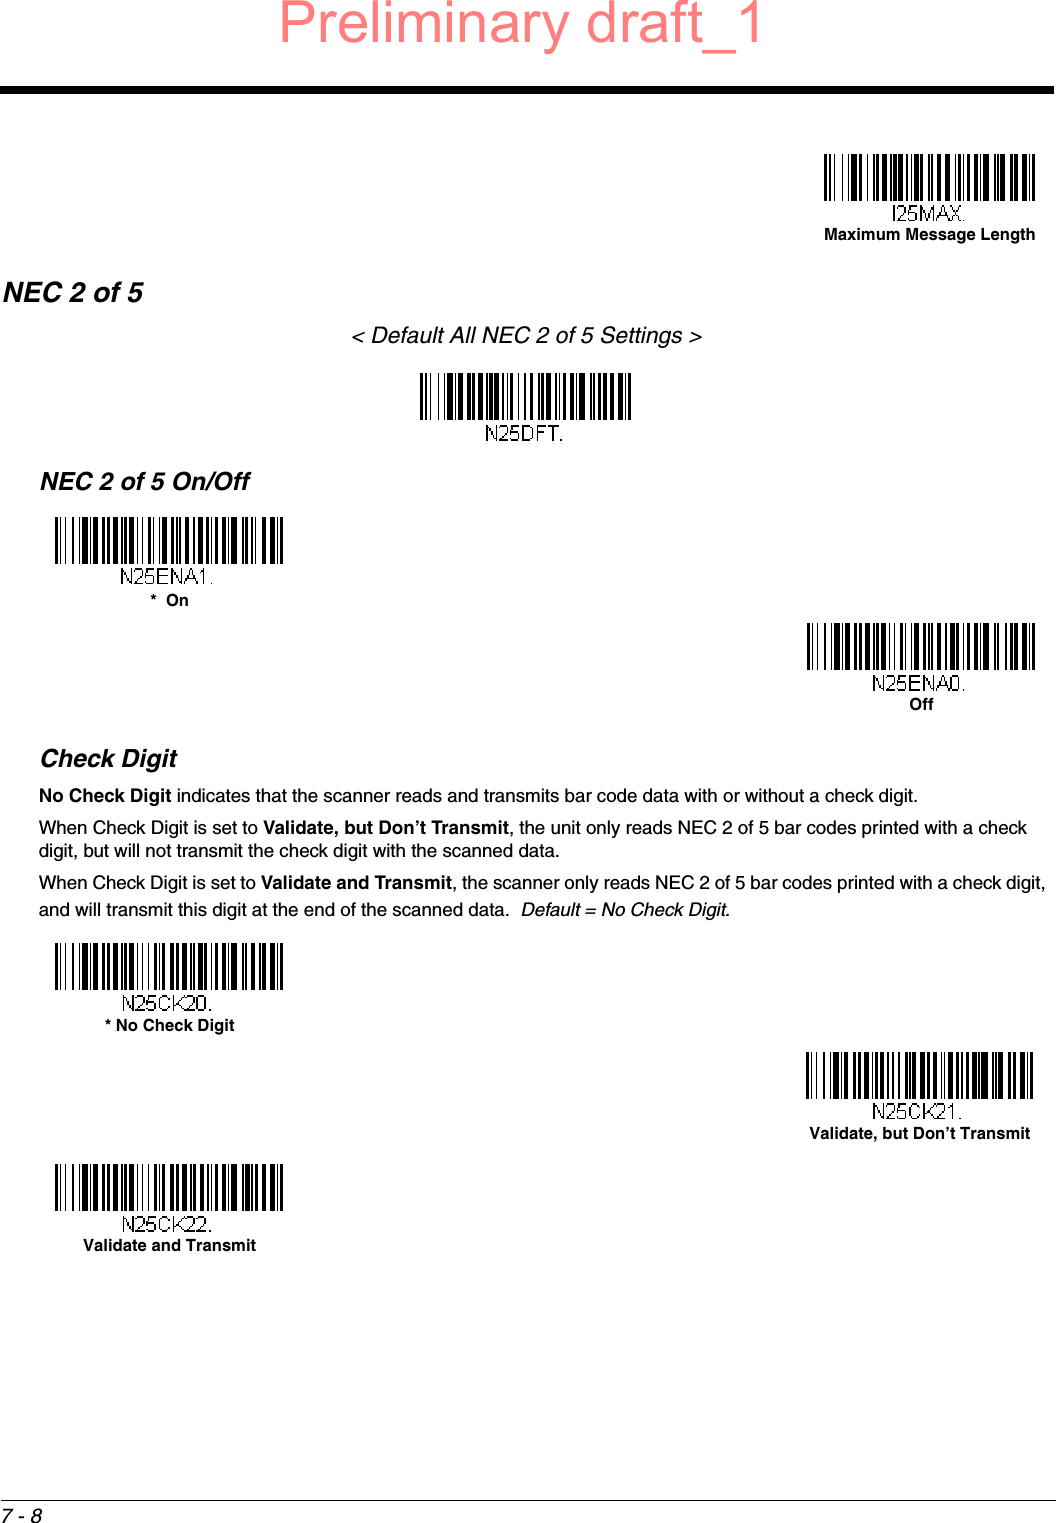 7 - 8NEC 2 of 5&lt; Default All NEC 2 of 5 Settings &gt;NEC 2 of 5 On/OffCheck DigitNo Check Digit indicates that the scanner reads and transmits bar code data with or without a check digit.When Check Digit is set to Validate, but Don’t Transmit, the unit only reads NEC 2 of 5 bar codes printed with a check digit, but will not transmit the check digit with the scanned data.  When Check Digit is set to Validate and Transmit, the scanner only reads NEC 2 of 5 bar codes printed with a check digit, and will transmit this digit at the end of the scanned data.  Default = No Check Digit.Maximum Message Length*  OnOff* No Check DigitValidate, but Don’t TransmitValidate and TransmitPreliminary draft_1